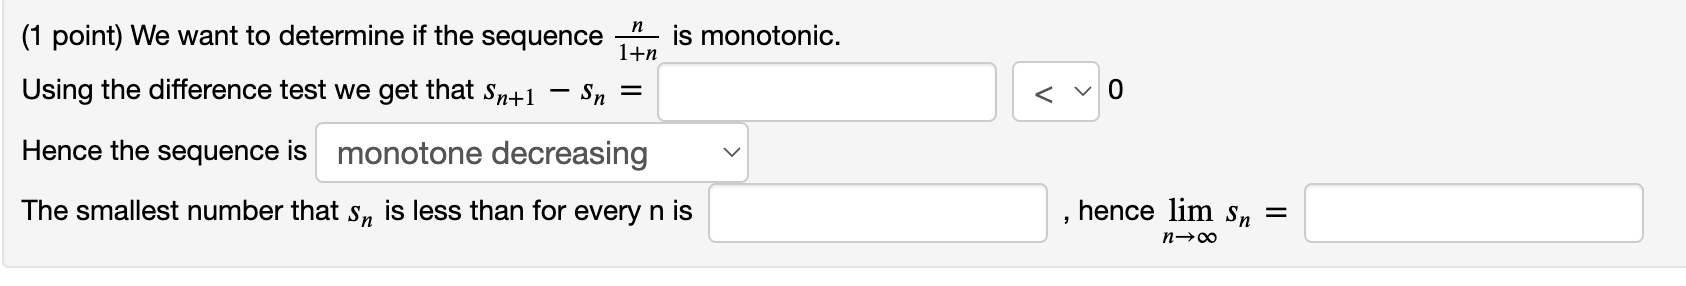 (1 point) We want to determine if the sequence \( \frac{n}{1+n} \) is monotonic.
Using the difference test we get that \( s_{